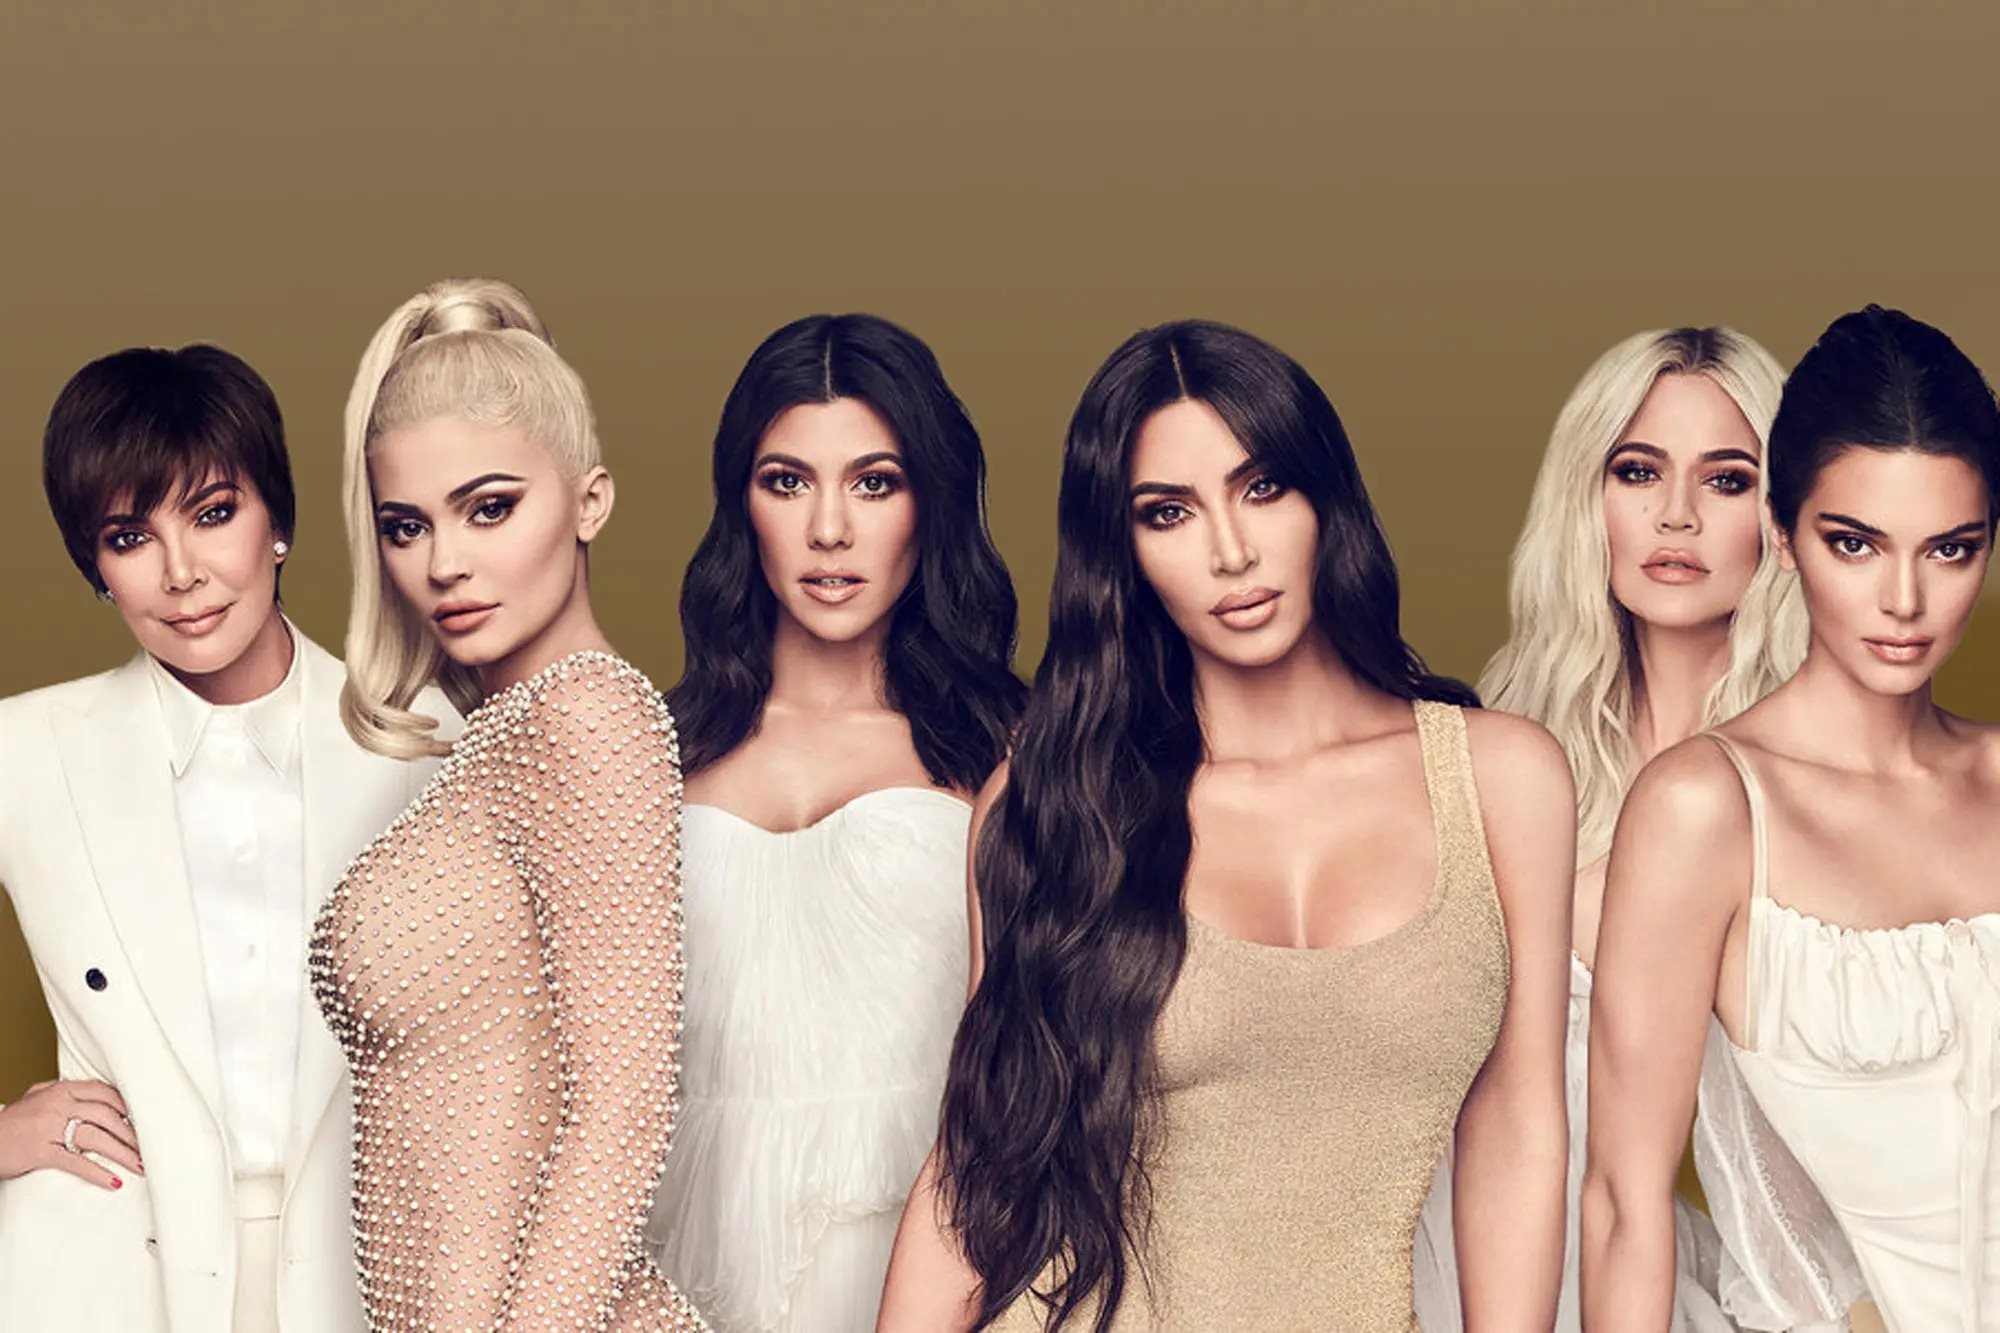 16 Intriguing Facts About The Kardashian Family